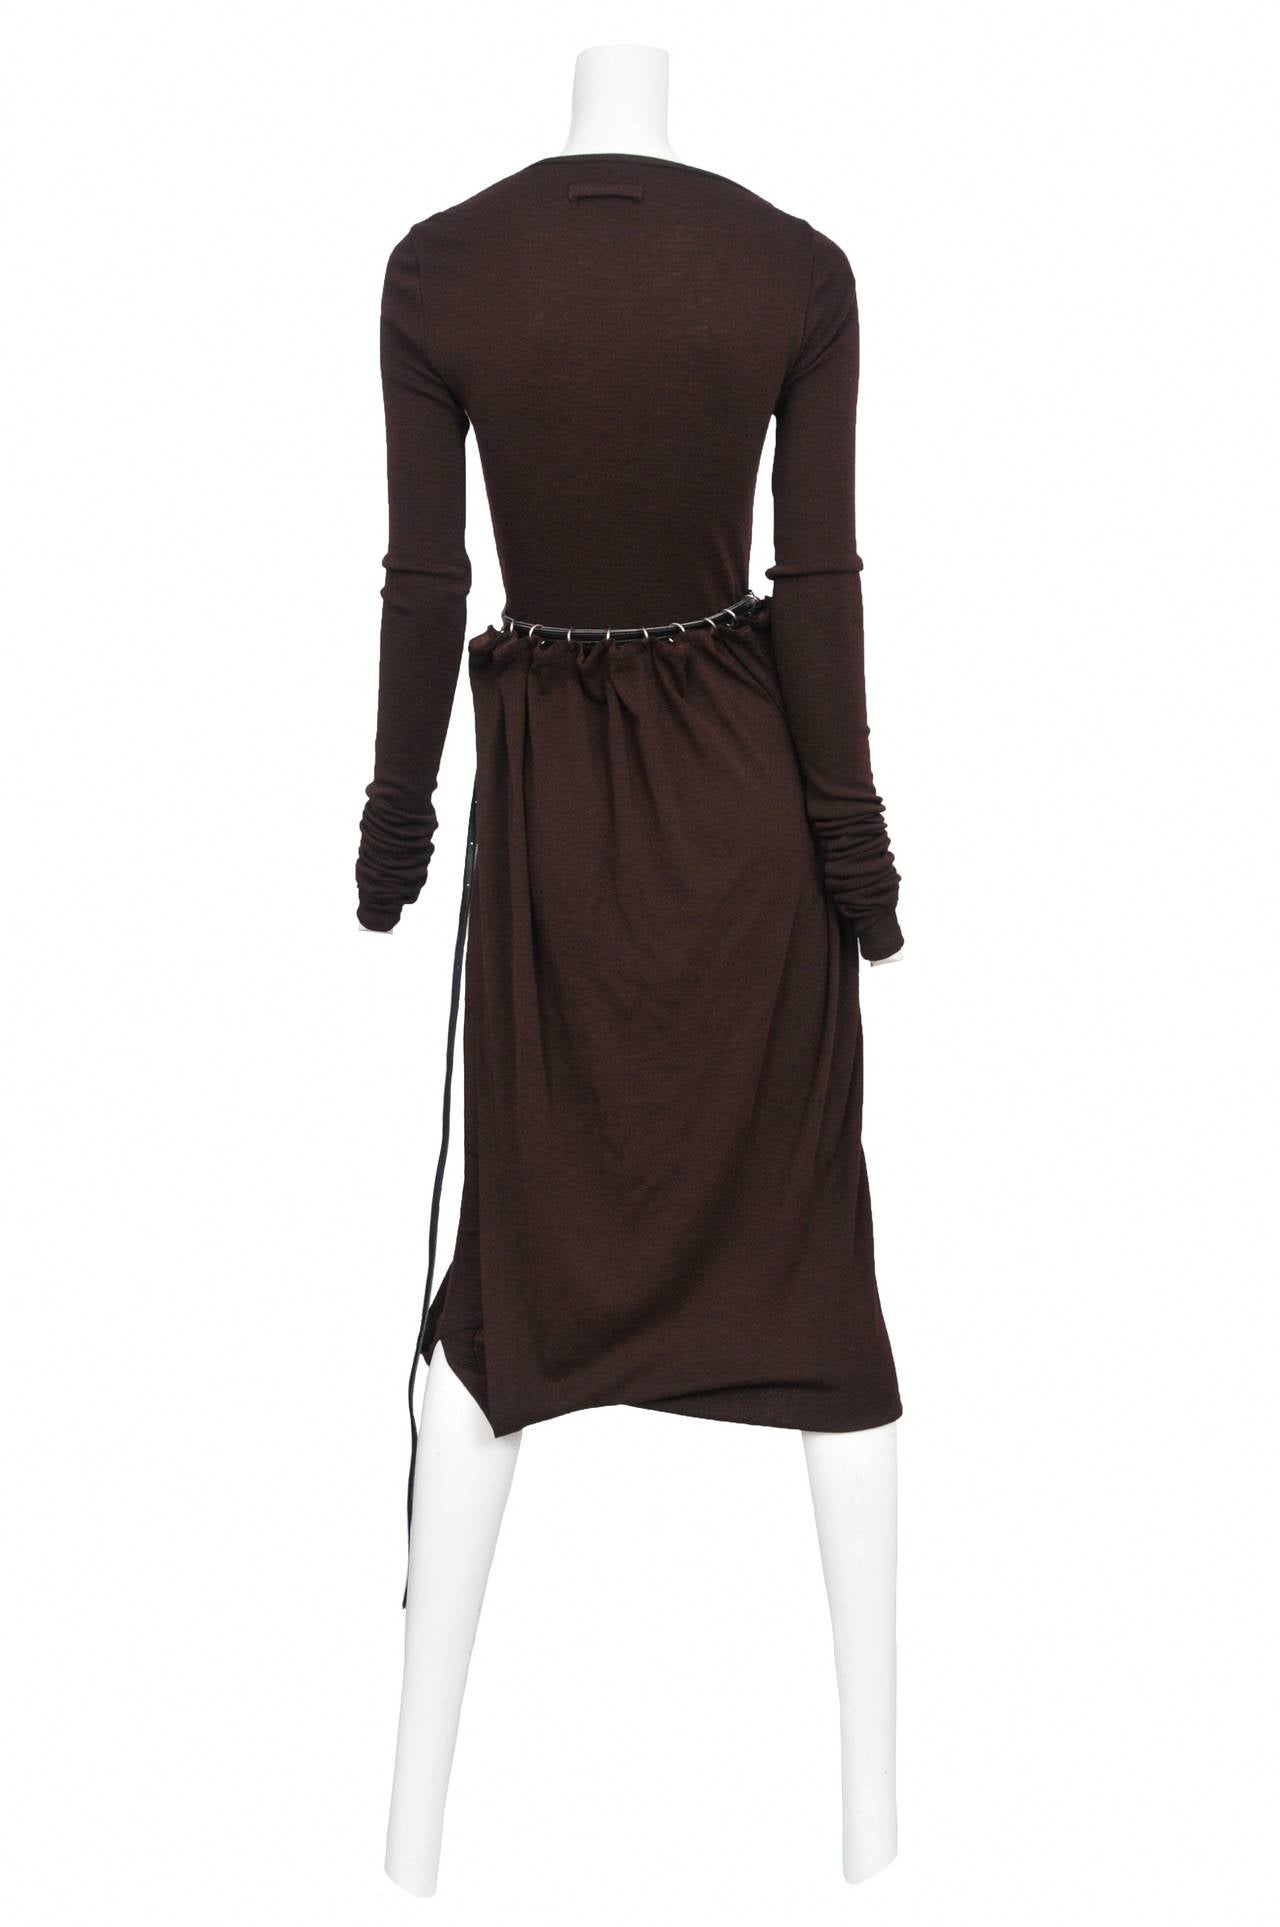 Vintage Jean Paul Gaultier plum brown jersey long sleeve dress with attached panel that folds up at knee and attaches at the waist with a black leather belt and silver rings.